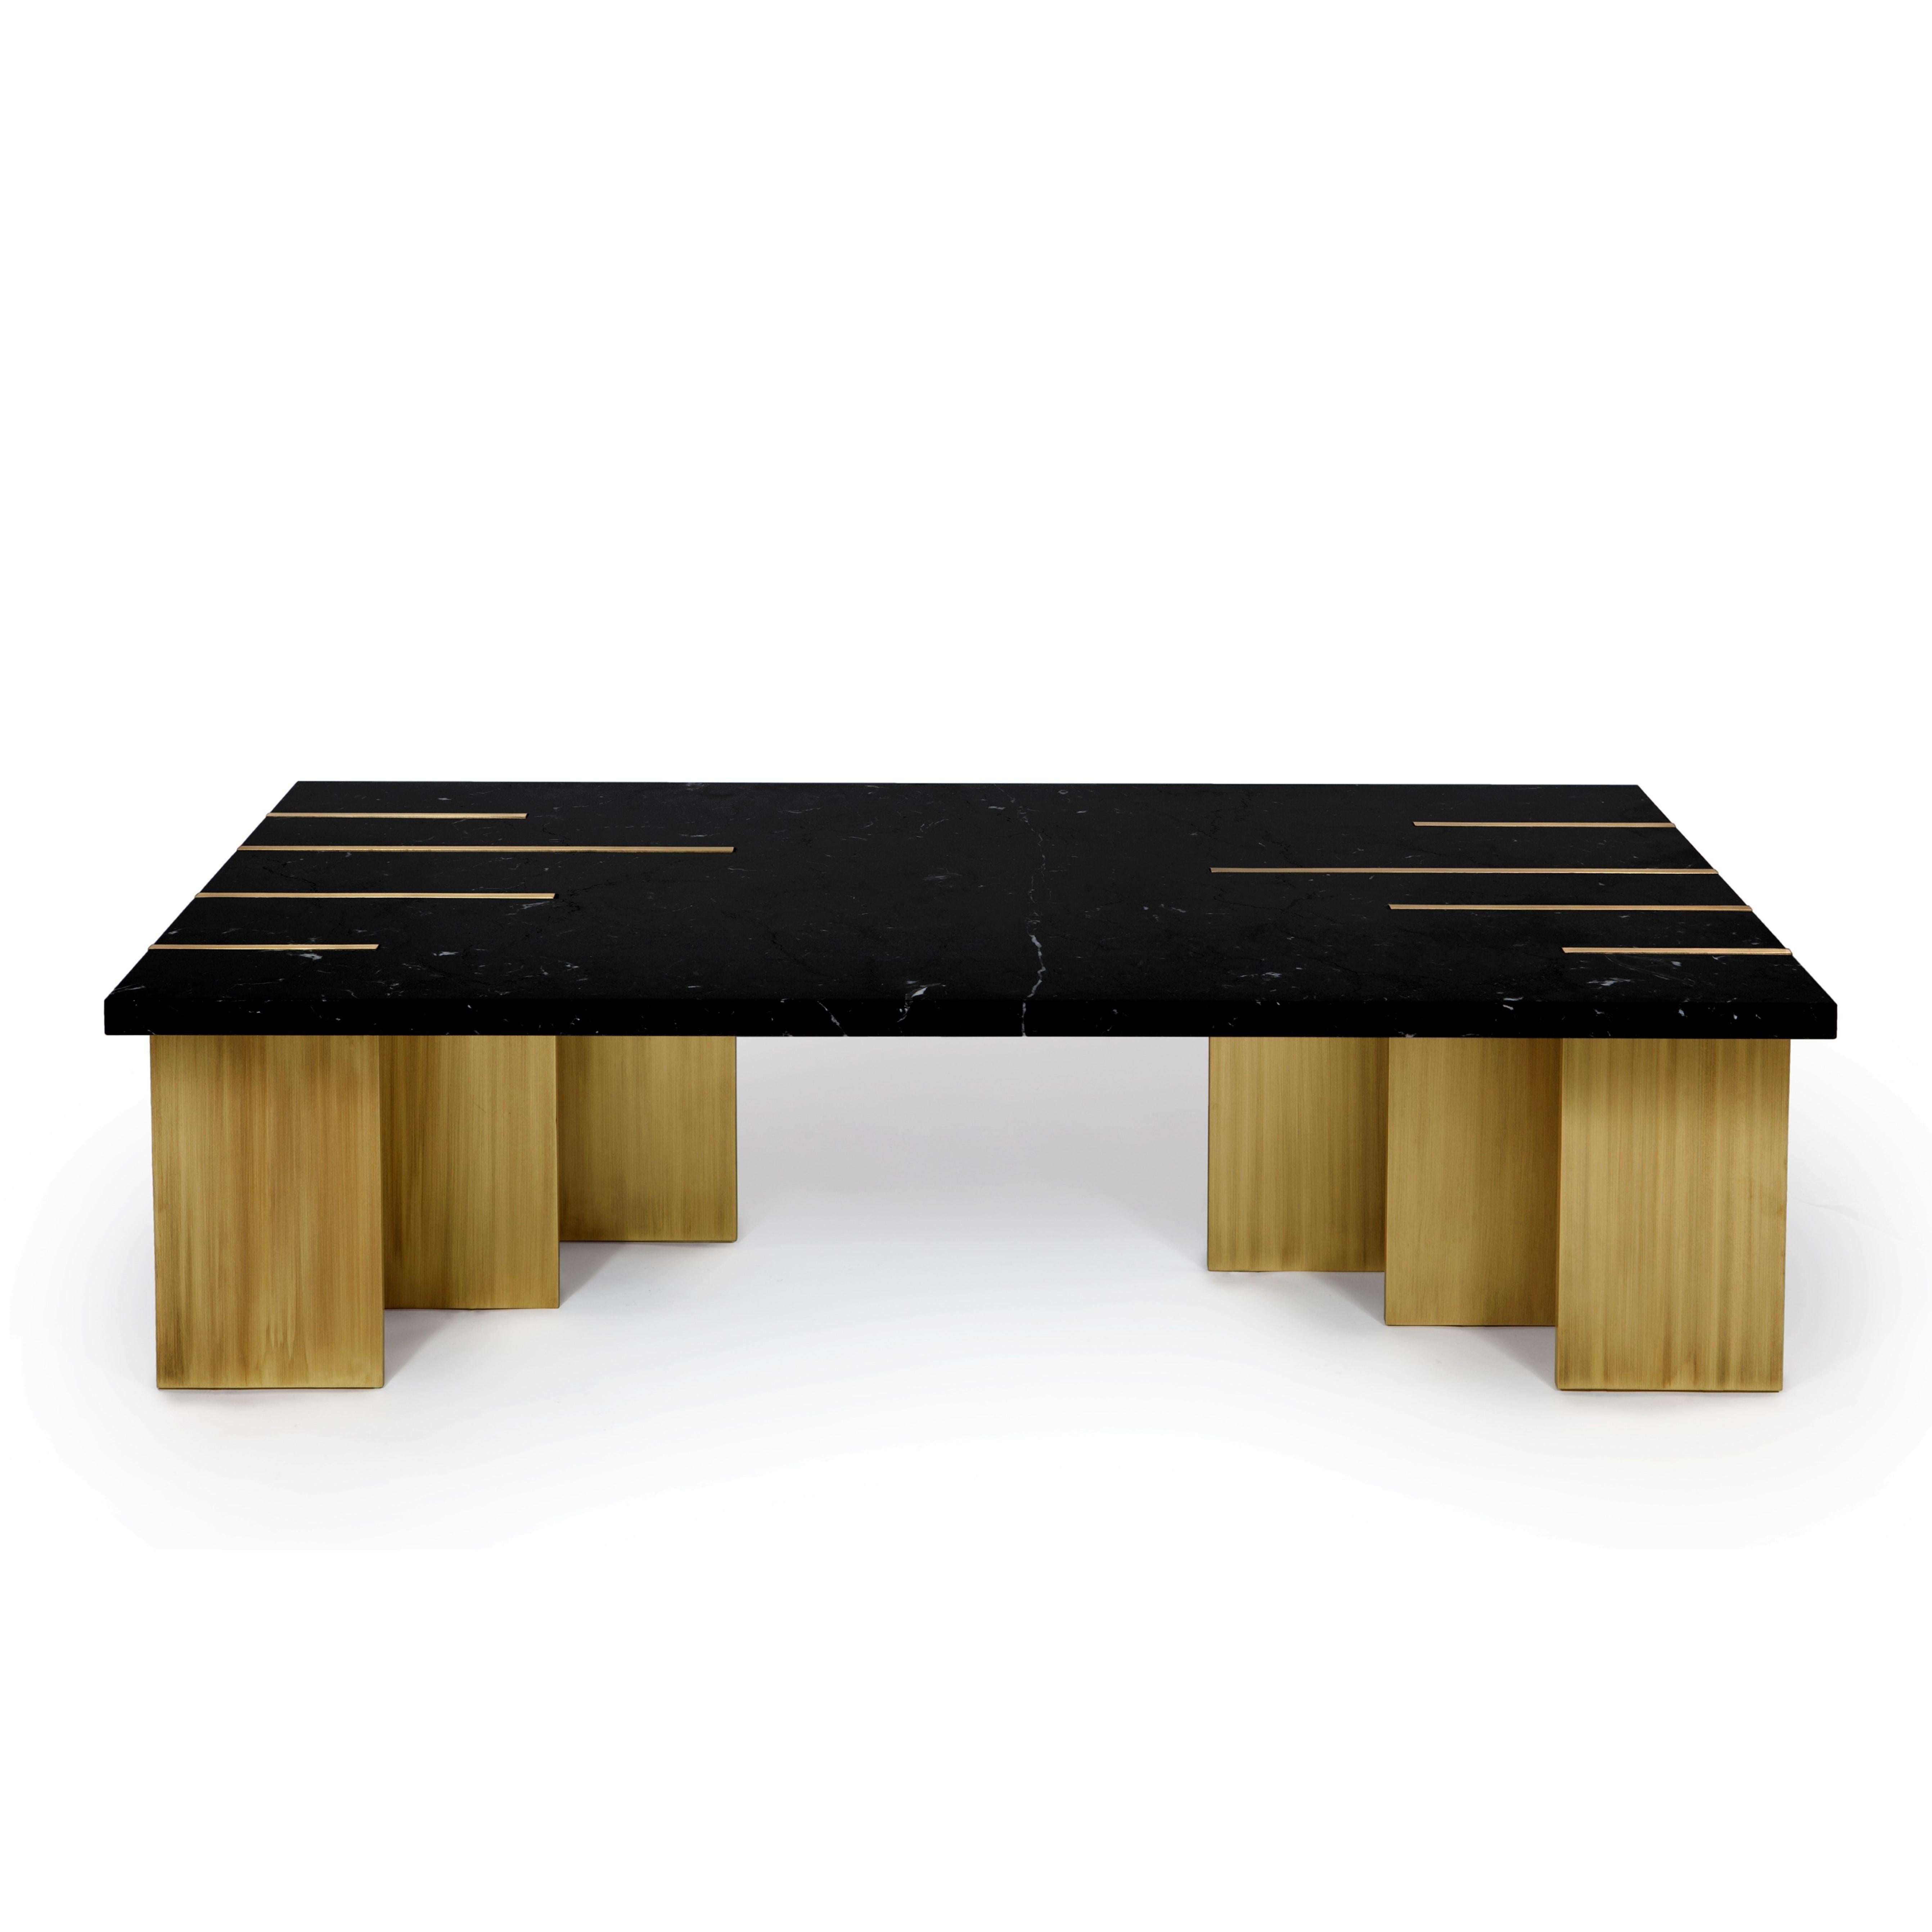 Modern Pianist Coffee Table, Nero Marquina Brass, InsidherLand by Joana Santos Barbosa For Sale